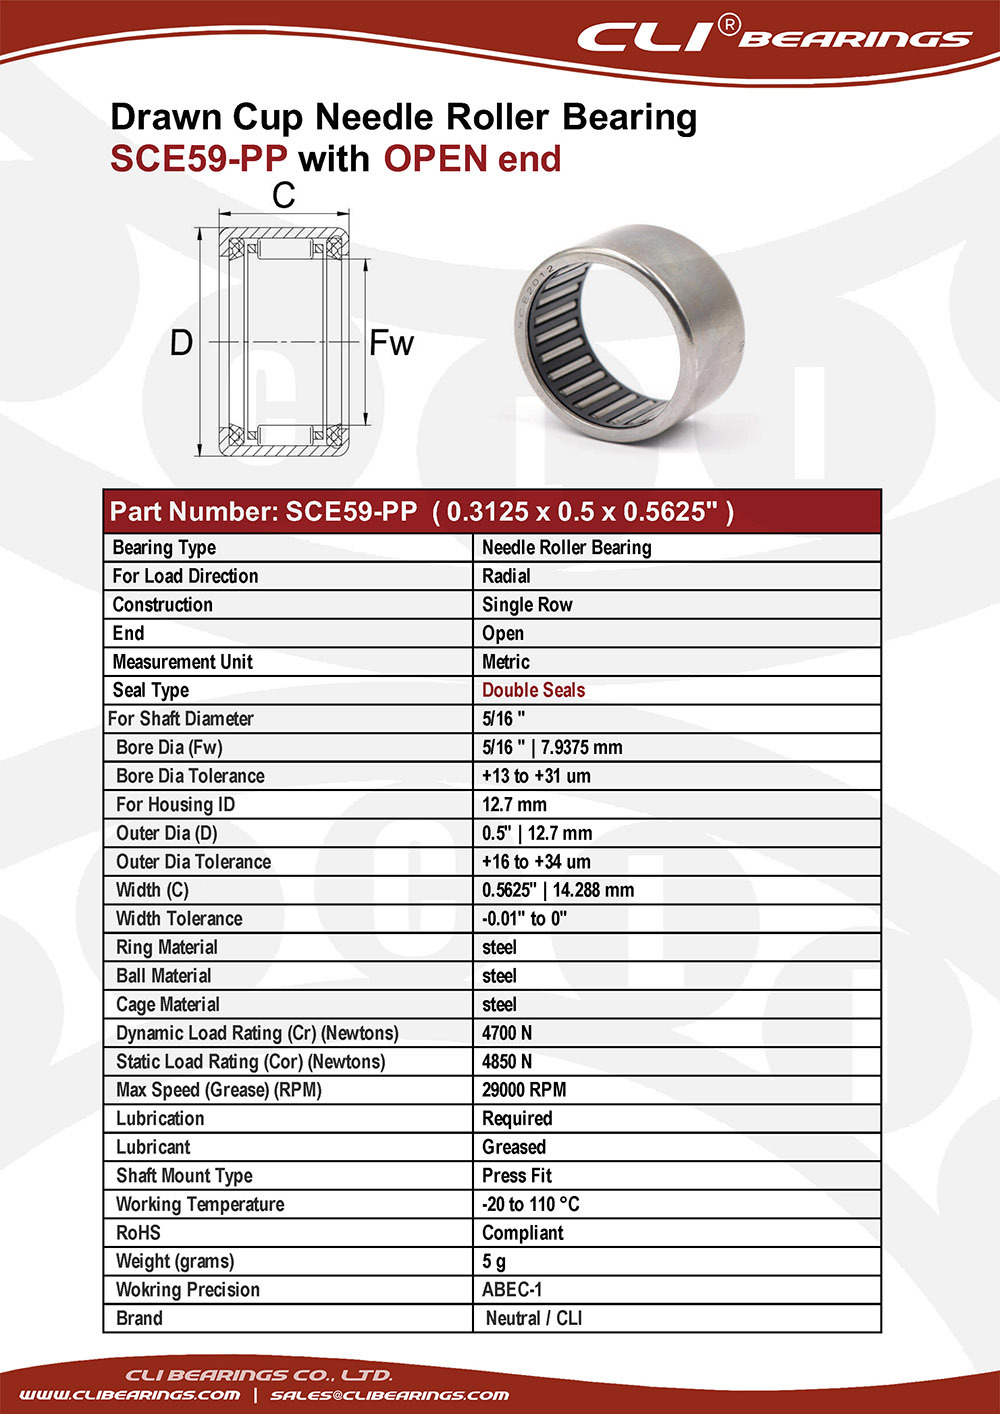 Original sce59 pp 0 3125x0 5x0 5625 drawn cup needle roller bearings with double seals   cli bearings co ltd nw